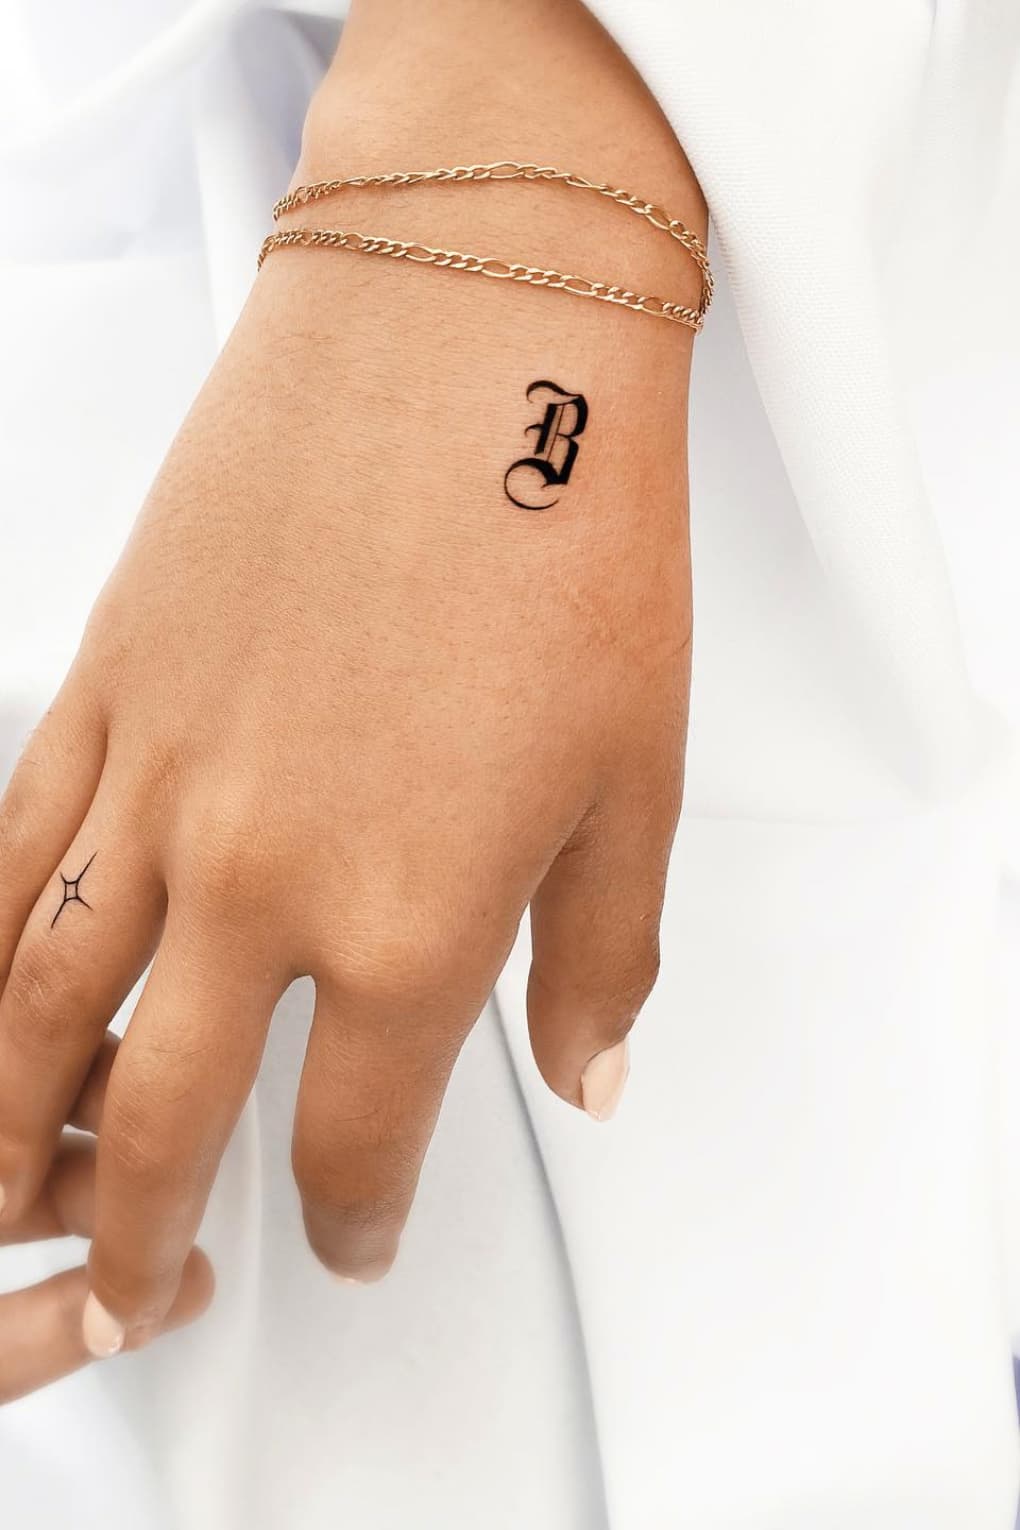 Small Letter Hand Tattoo